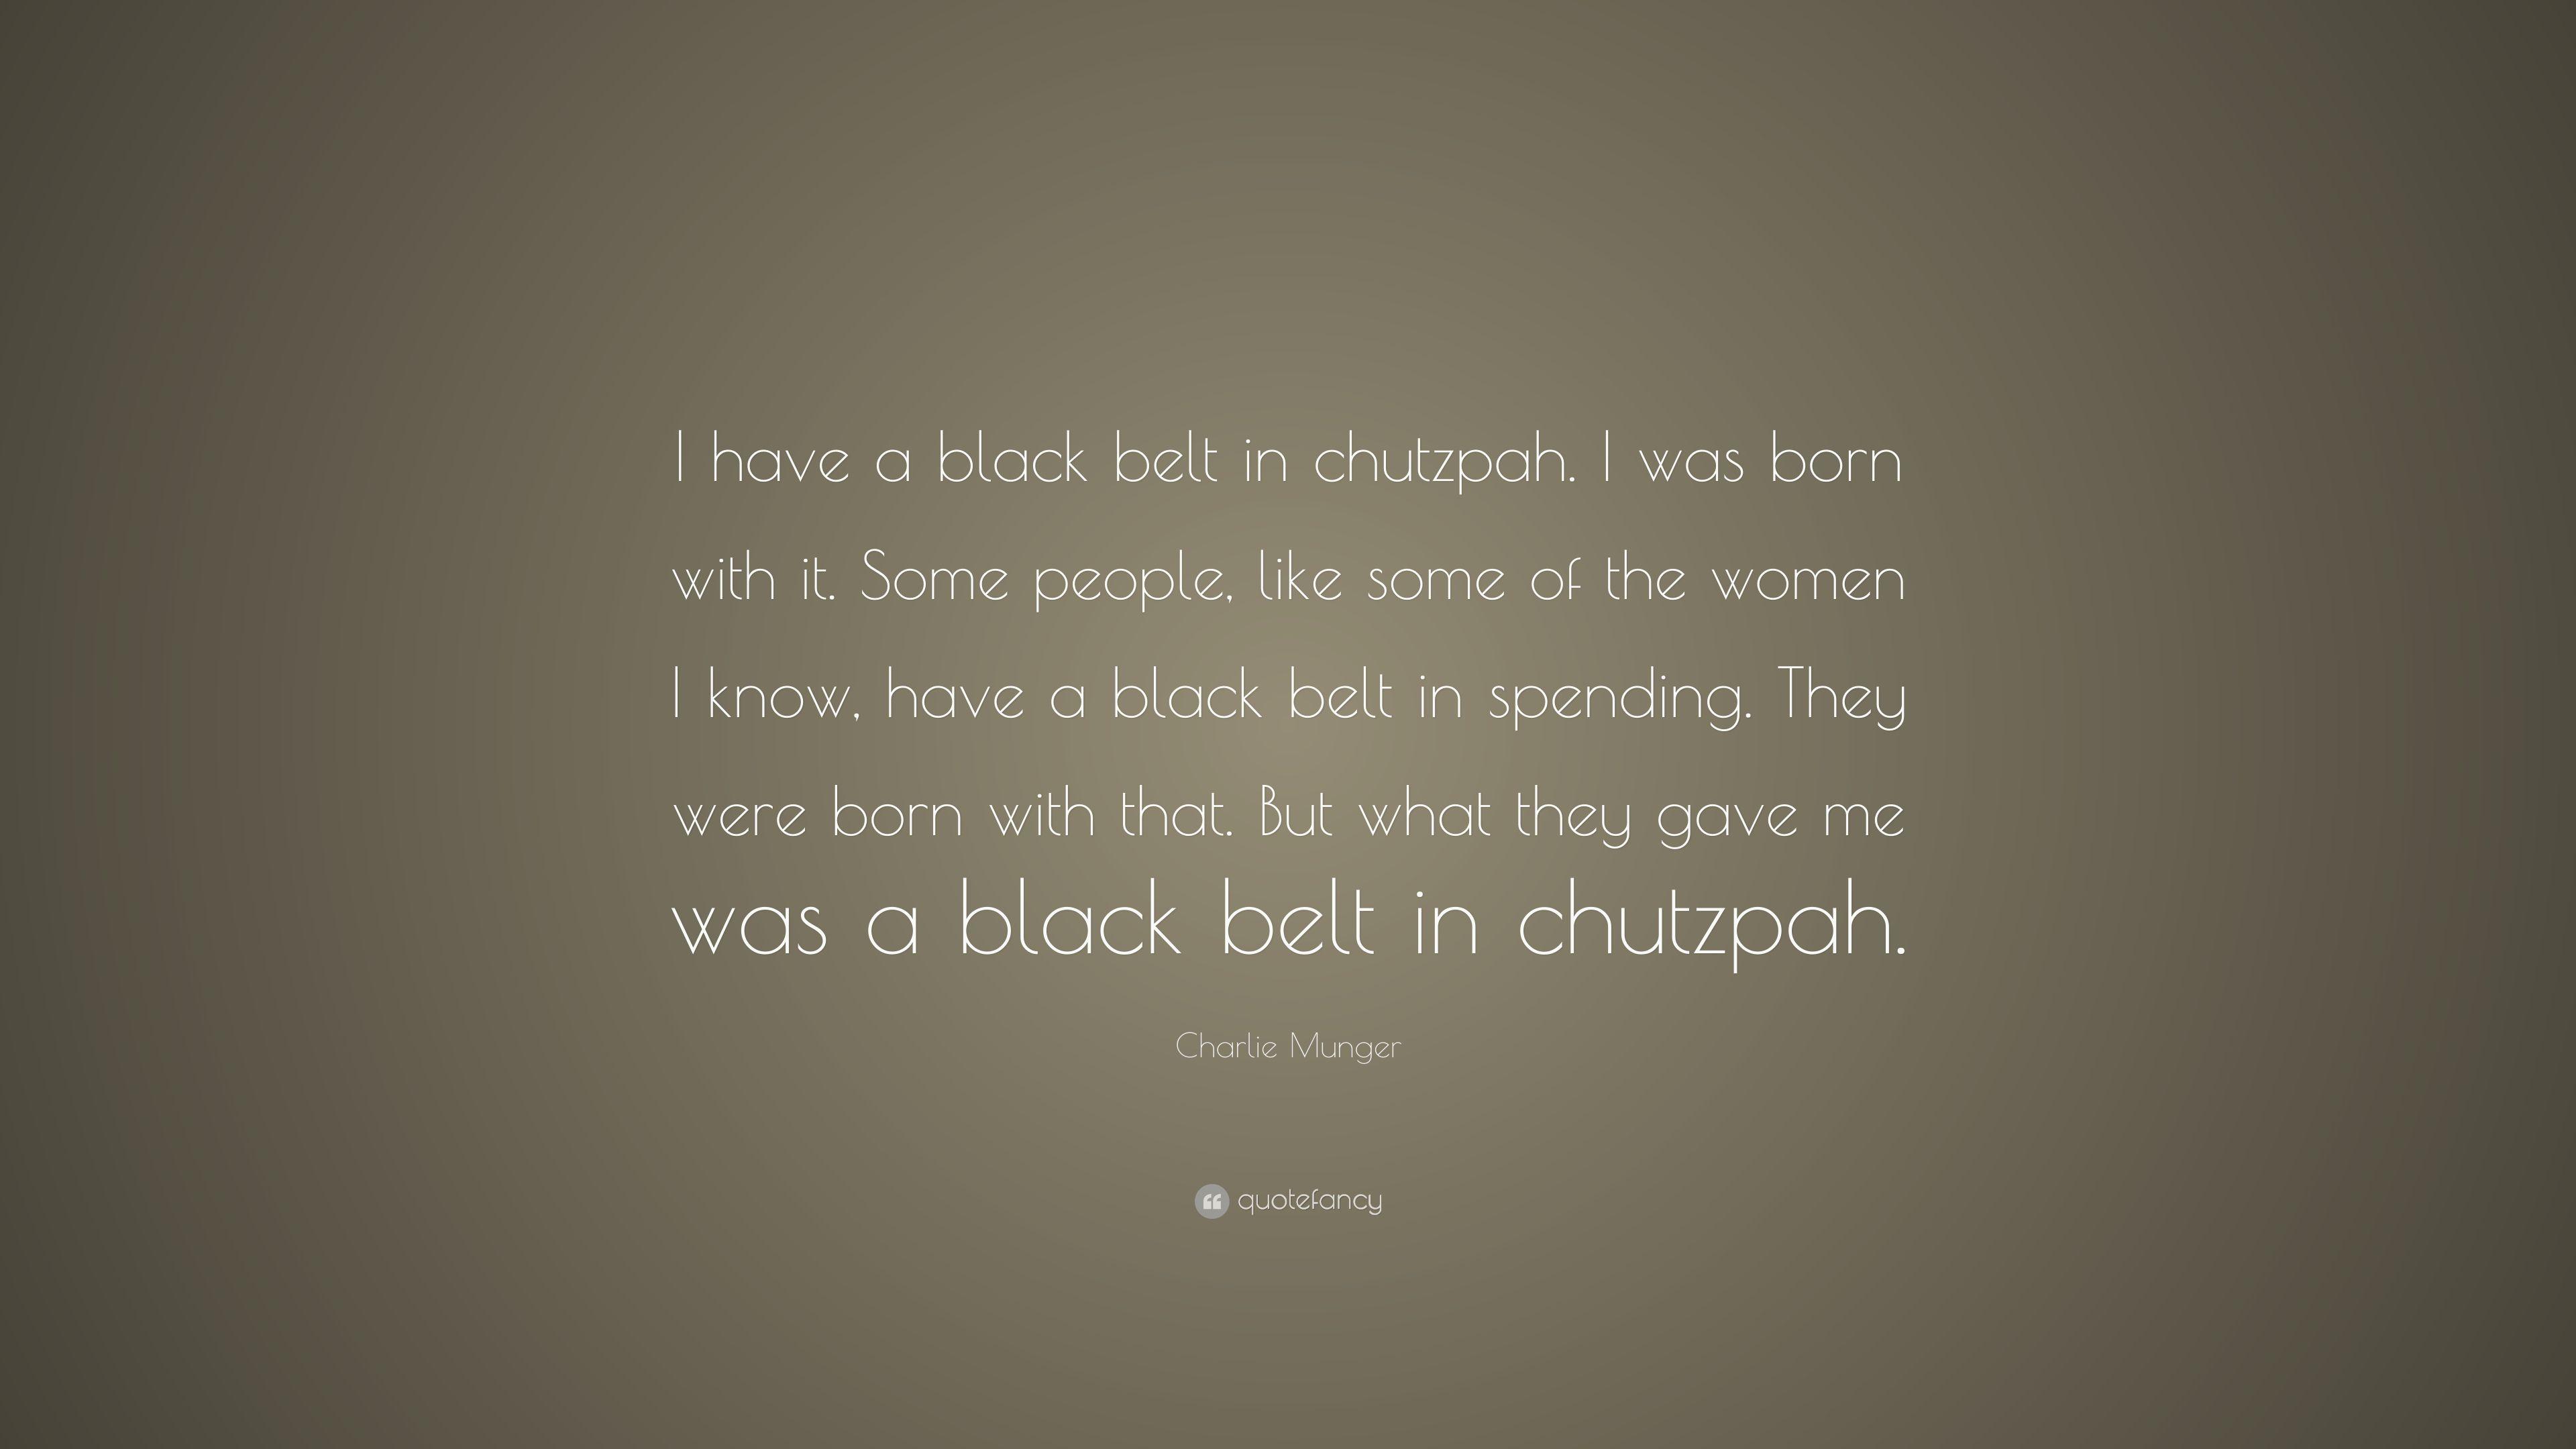 Charlie Munger Quote: “I have a black belt in chutzpah. I was born